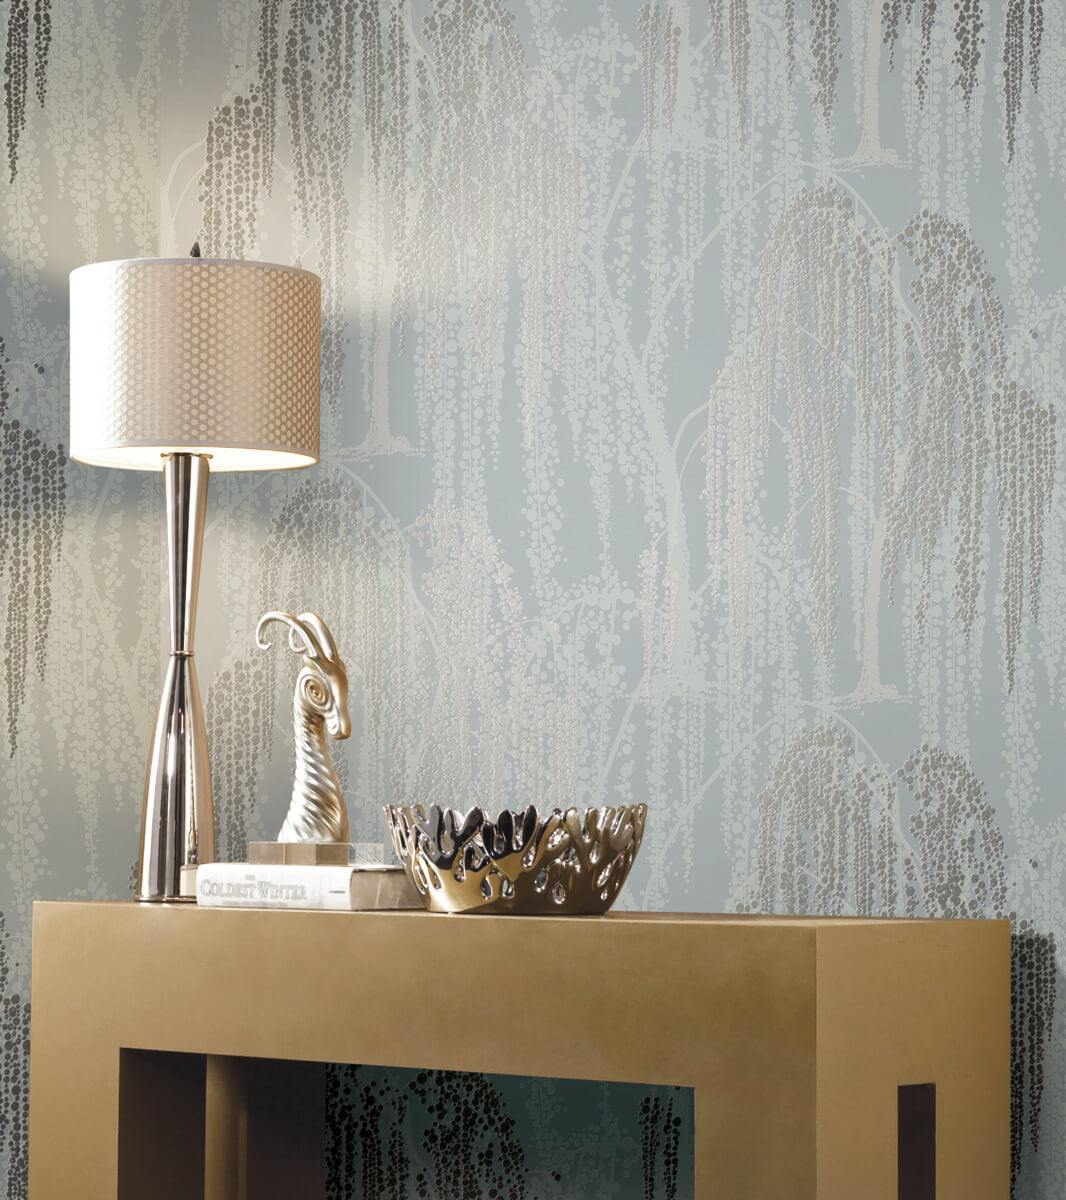 Candice Olson After 8 Willow Glow Wallpaper - Smokey Blue